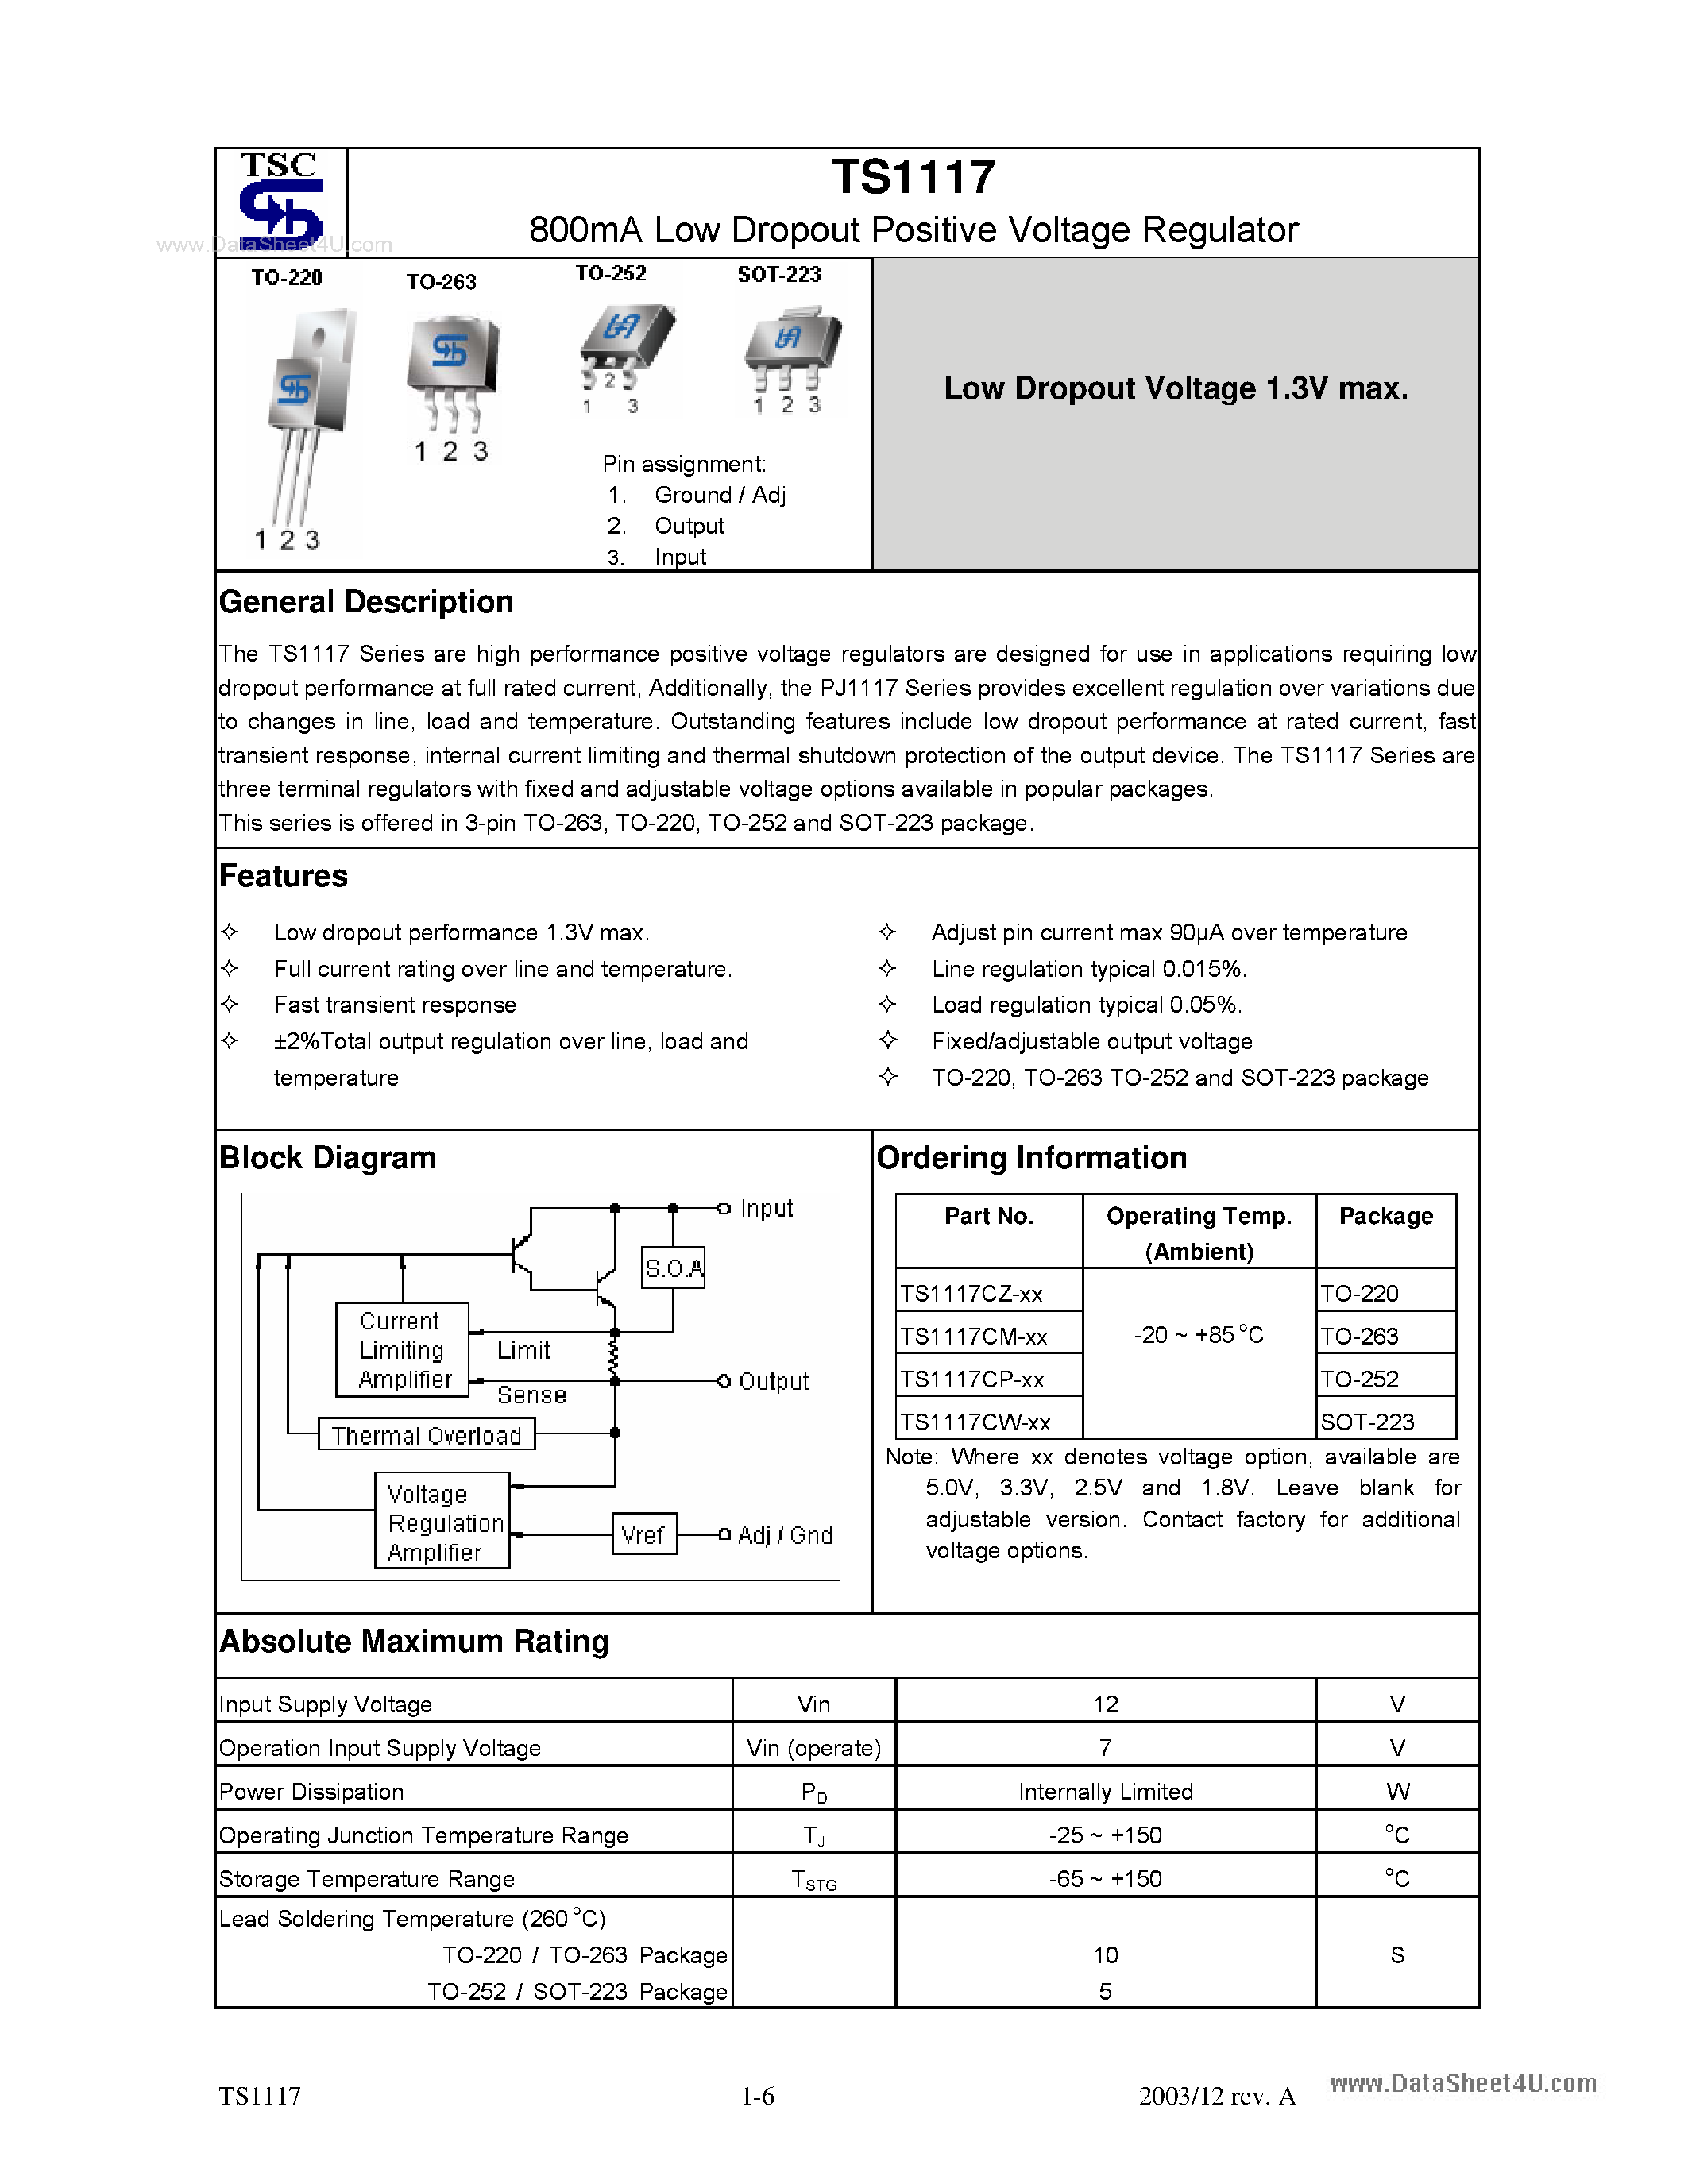 Datasheet TS1117 - 800mA Low Dropout Positive Voltage Regulator page 1